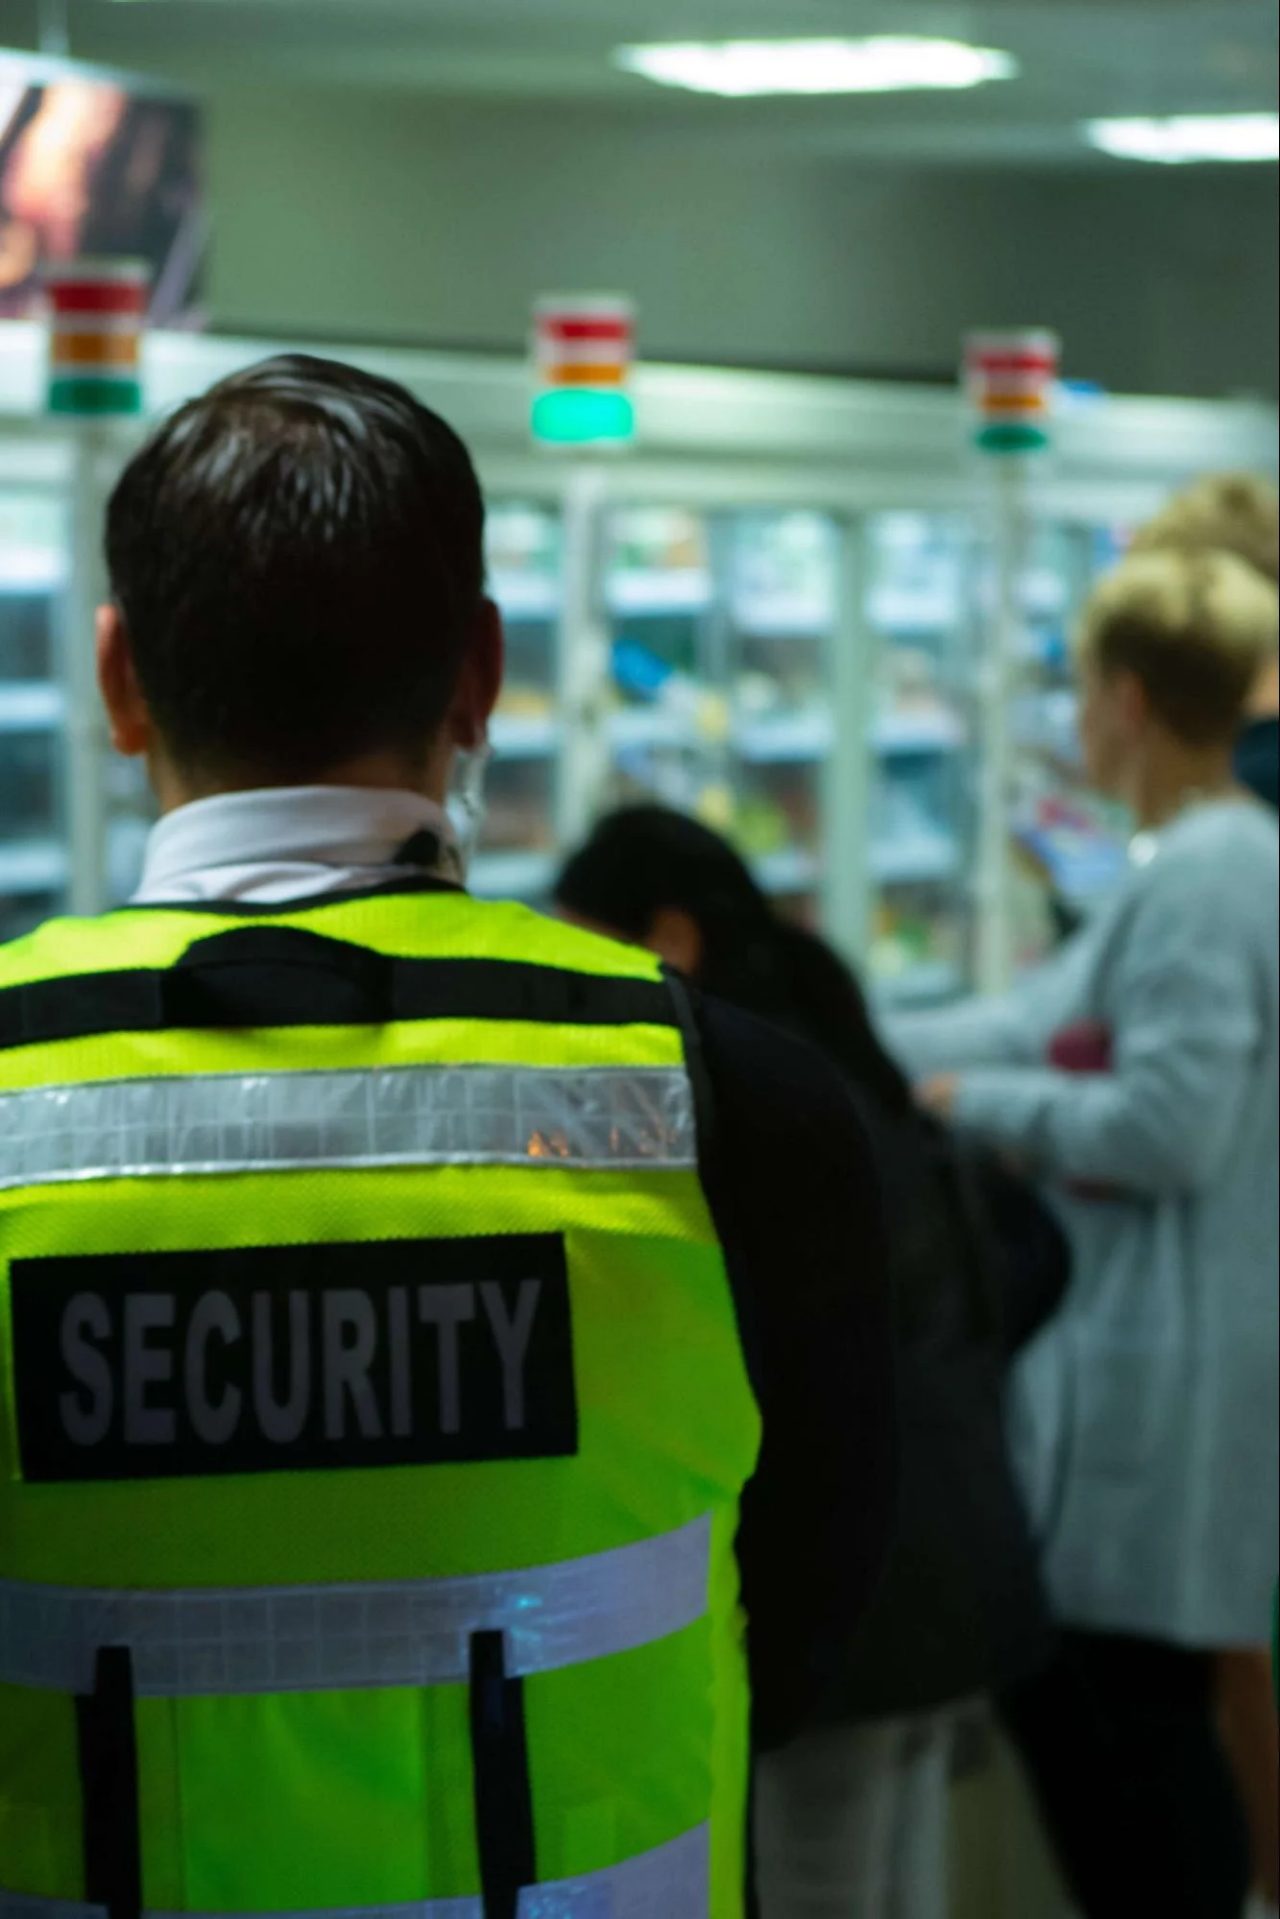 Man standing in a store wearing security vest